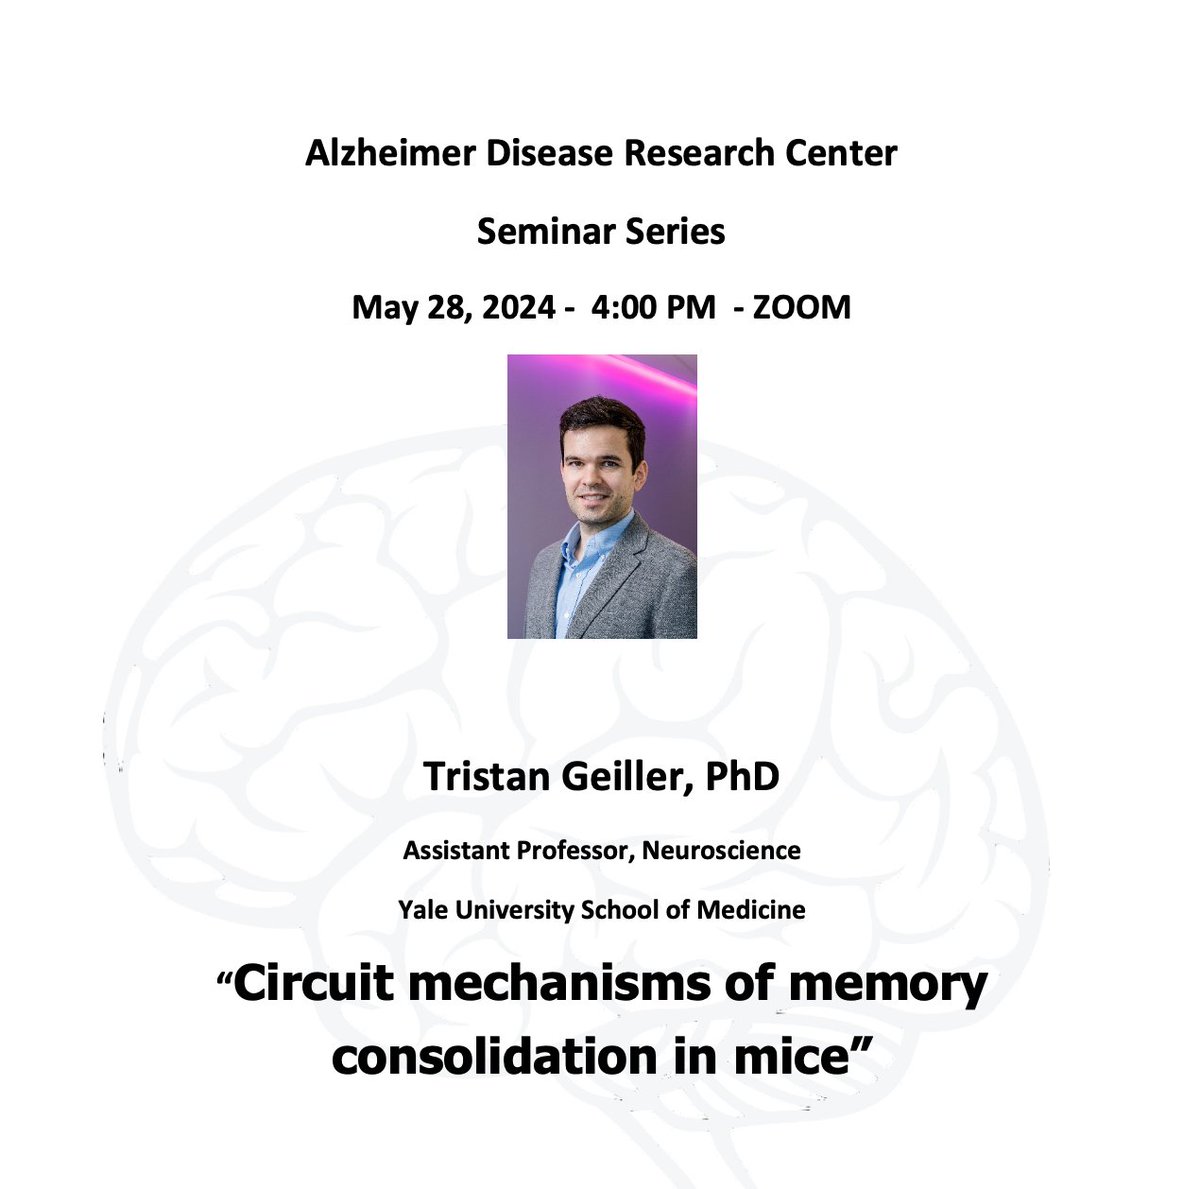 On Tuesday, May 28 at 4pm 🕓, @tgeiller, assistant professor at @YaleNeuro, will speak on the 'Circuit mechanisms of memory consolidation in mice' as part of the #Alzheimers Disease Research Center Seminar Series 🧠🐁 **This seminar is limited to @Yale affiliates**